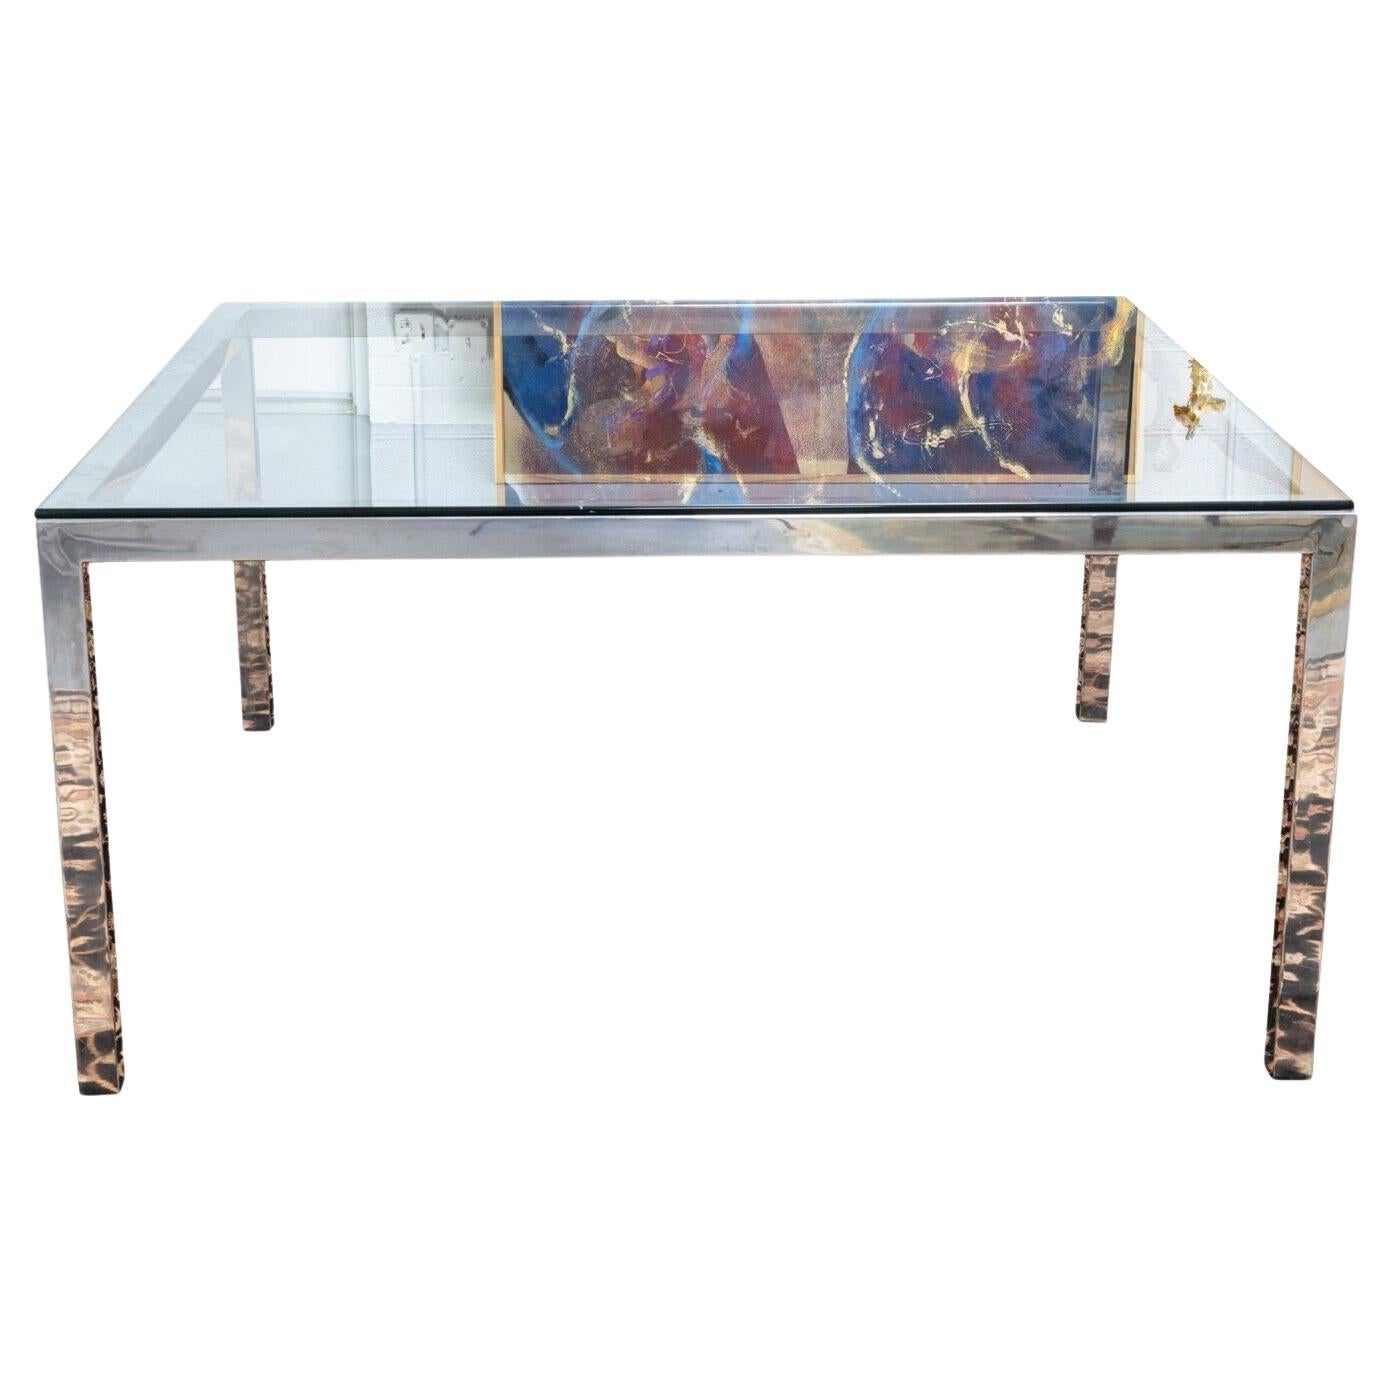 Contemporary Modern Milo Baughman Large Polished Chrome Square Dining Table For Sale